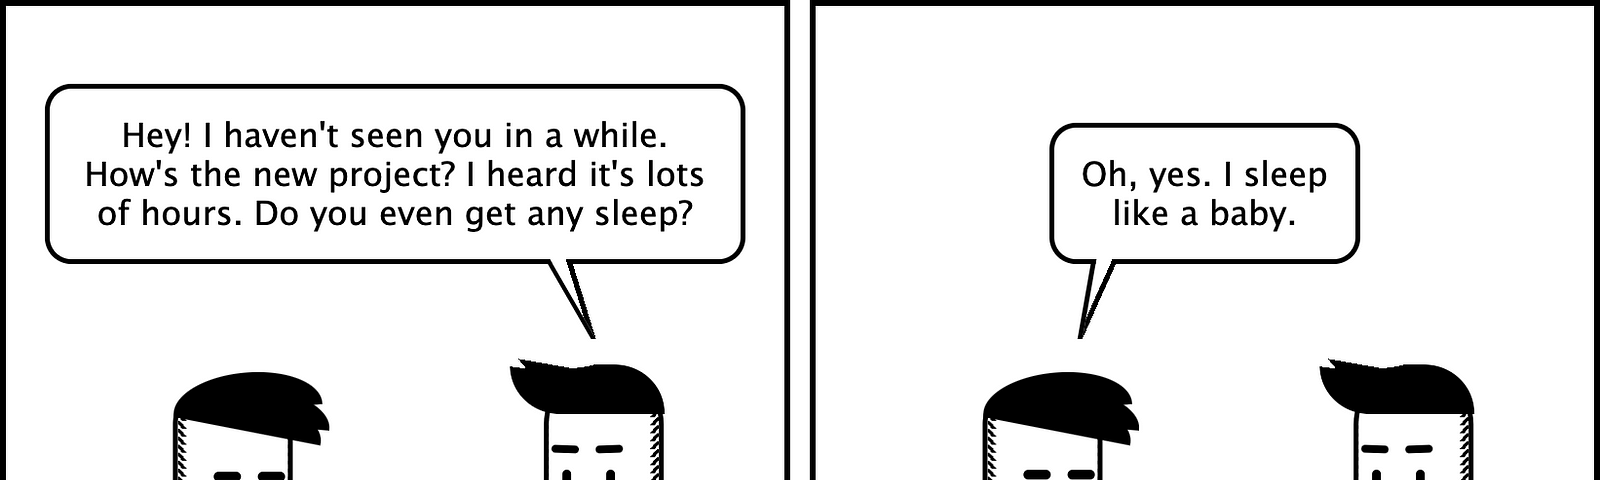 Comic with four panels in a 2x2 grid. It has two characters talking. The first one asks ‘Hey! I haven’t seen you in a while. How’s the new project? Lots of hours? Do you even sleep?’ The second replies ‘Oh, I sleep like a baby’ The first one asks ‘deeply and well?’ And the second one replies sadly ‘No. I wake up every 3 hours crying and calling for my mom’